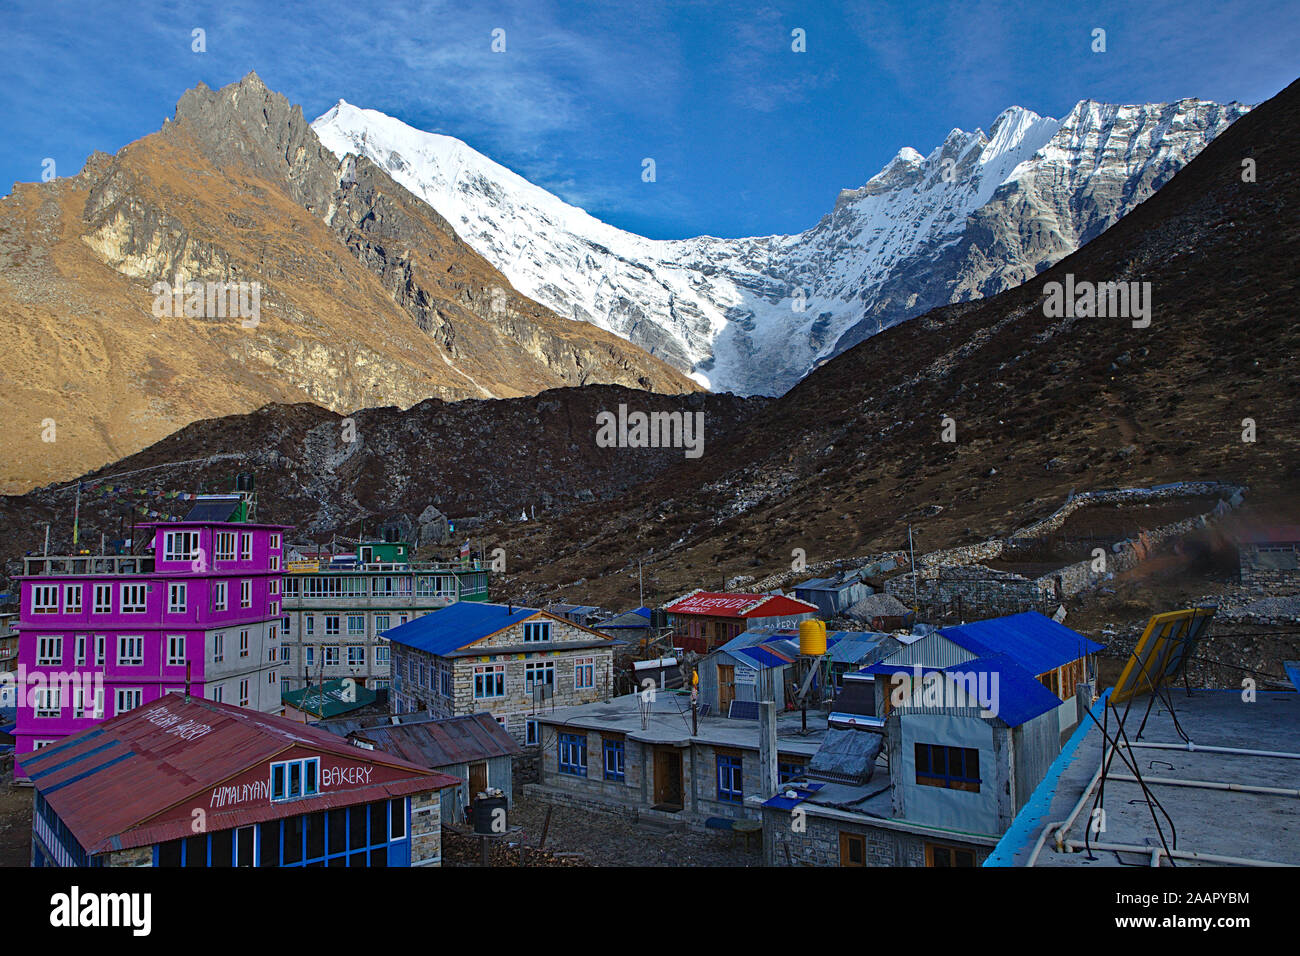 small village of Kyanjin Gompa in the shadow of the mountains with blue roofs and pink house Stock Photo